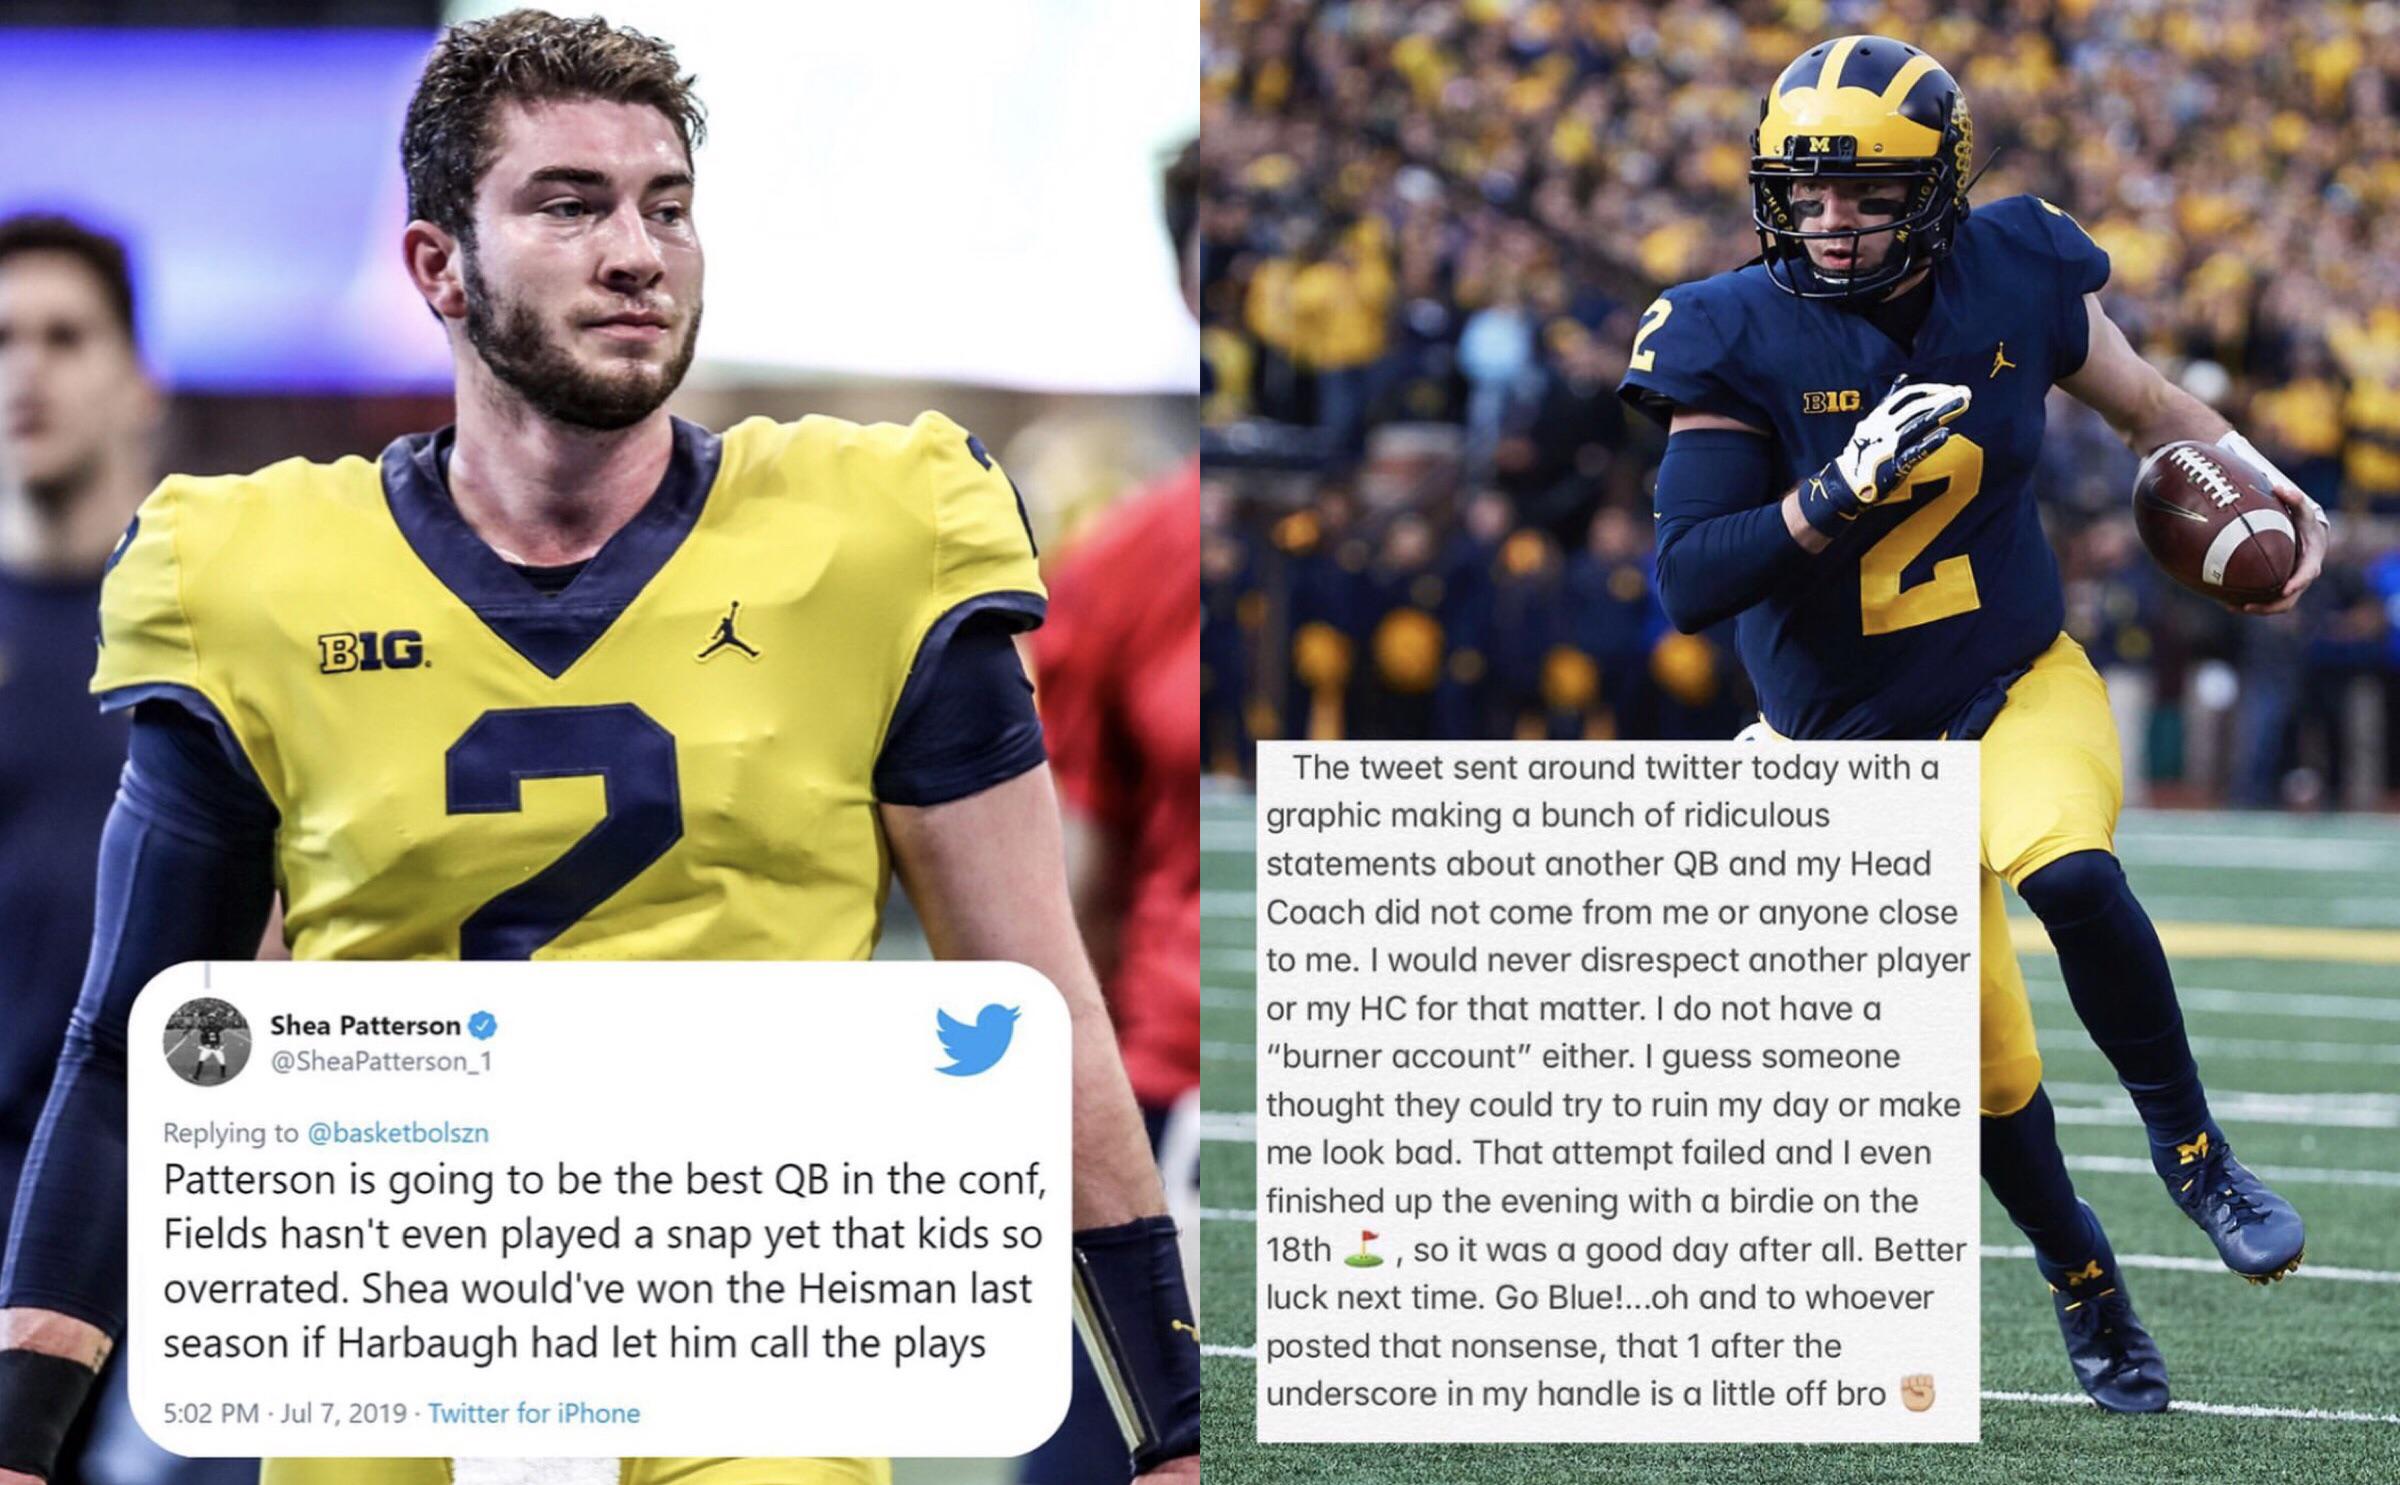 Shea Patterson The tweet sent around twitter today with a graphic making a bunch of ridiculous statements about another Qb and my Head Coach did not come from me or anyone close to me. I would never disrespect another player or my Hc f